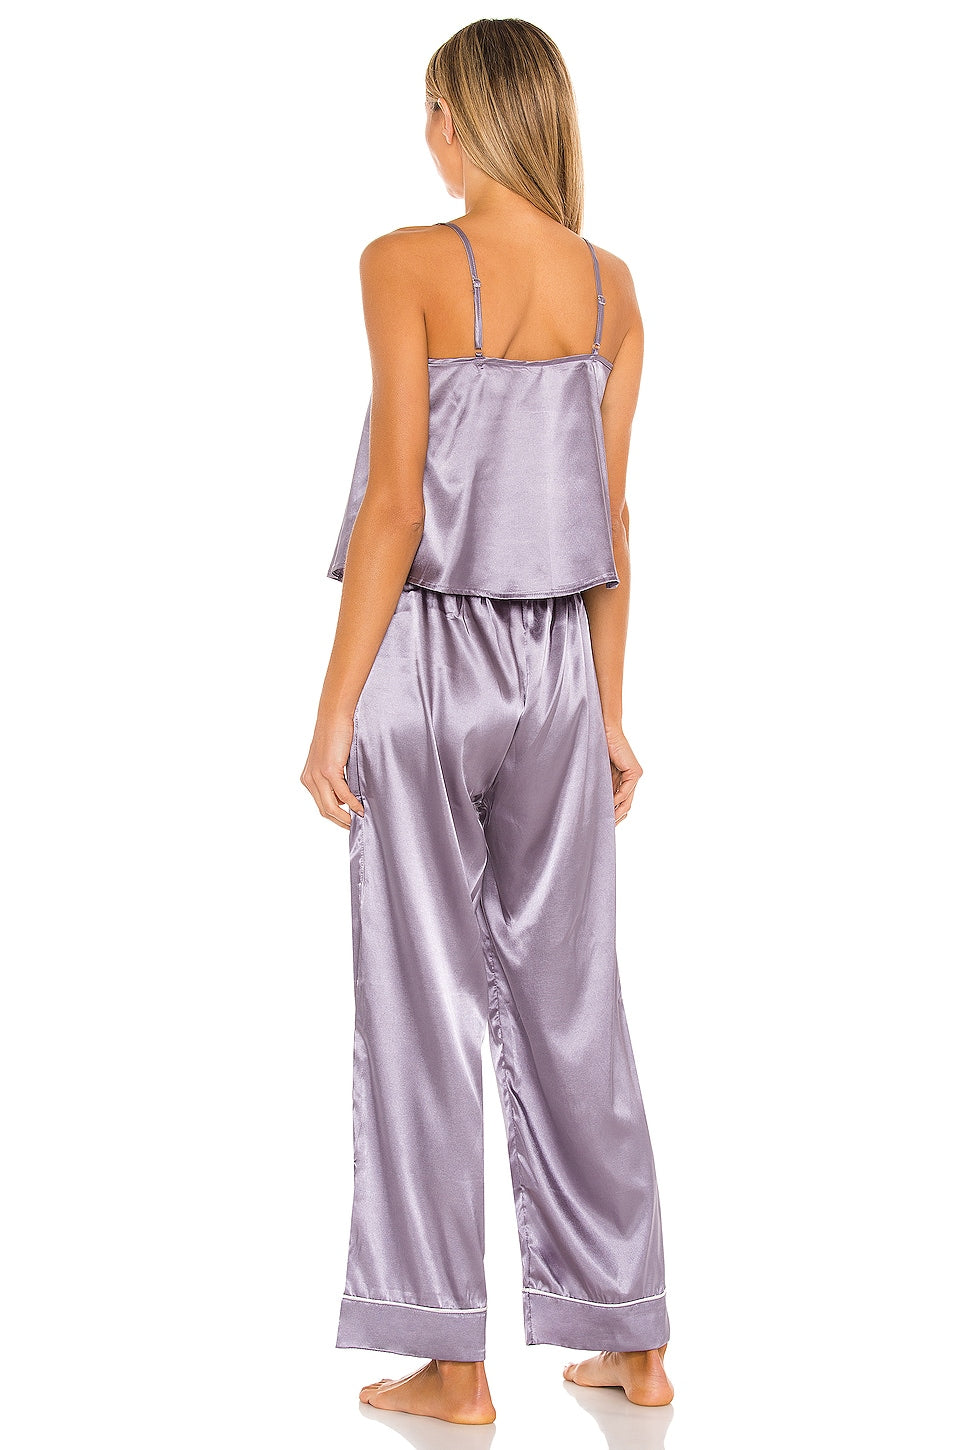 Lovers and Friends Madison PJ Set in Lilac SIZE X-LARGE